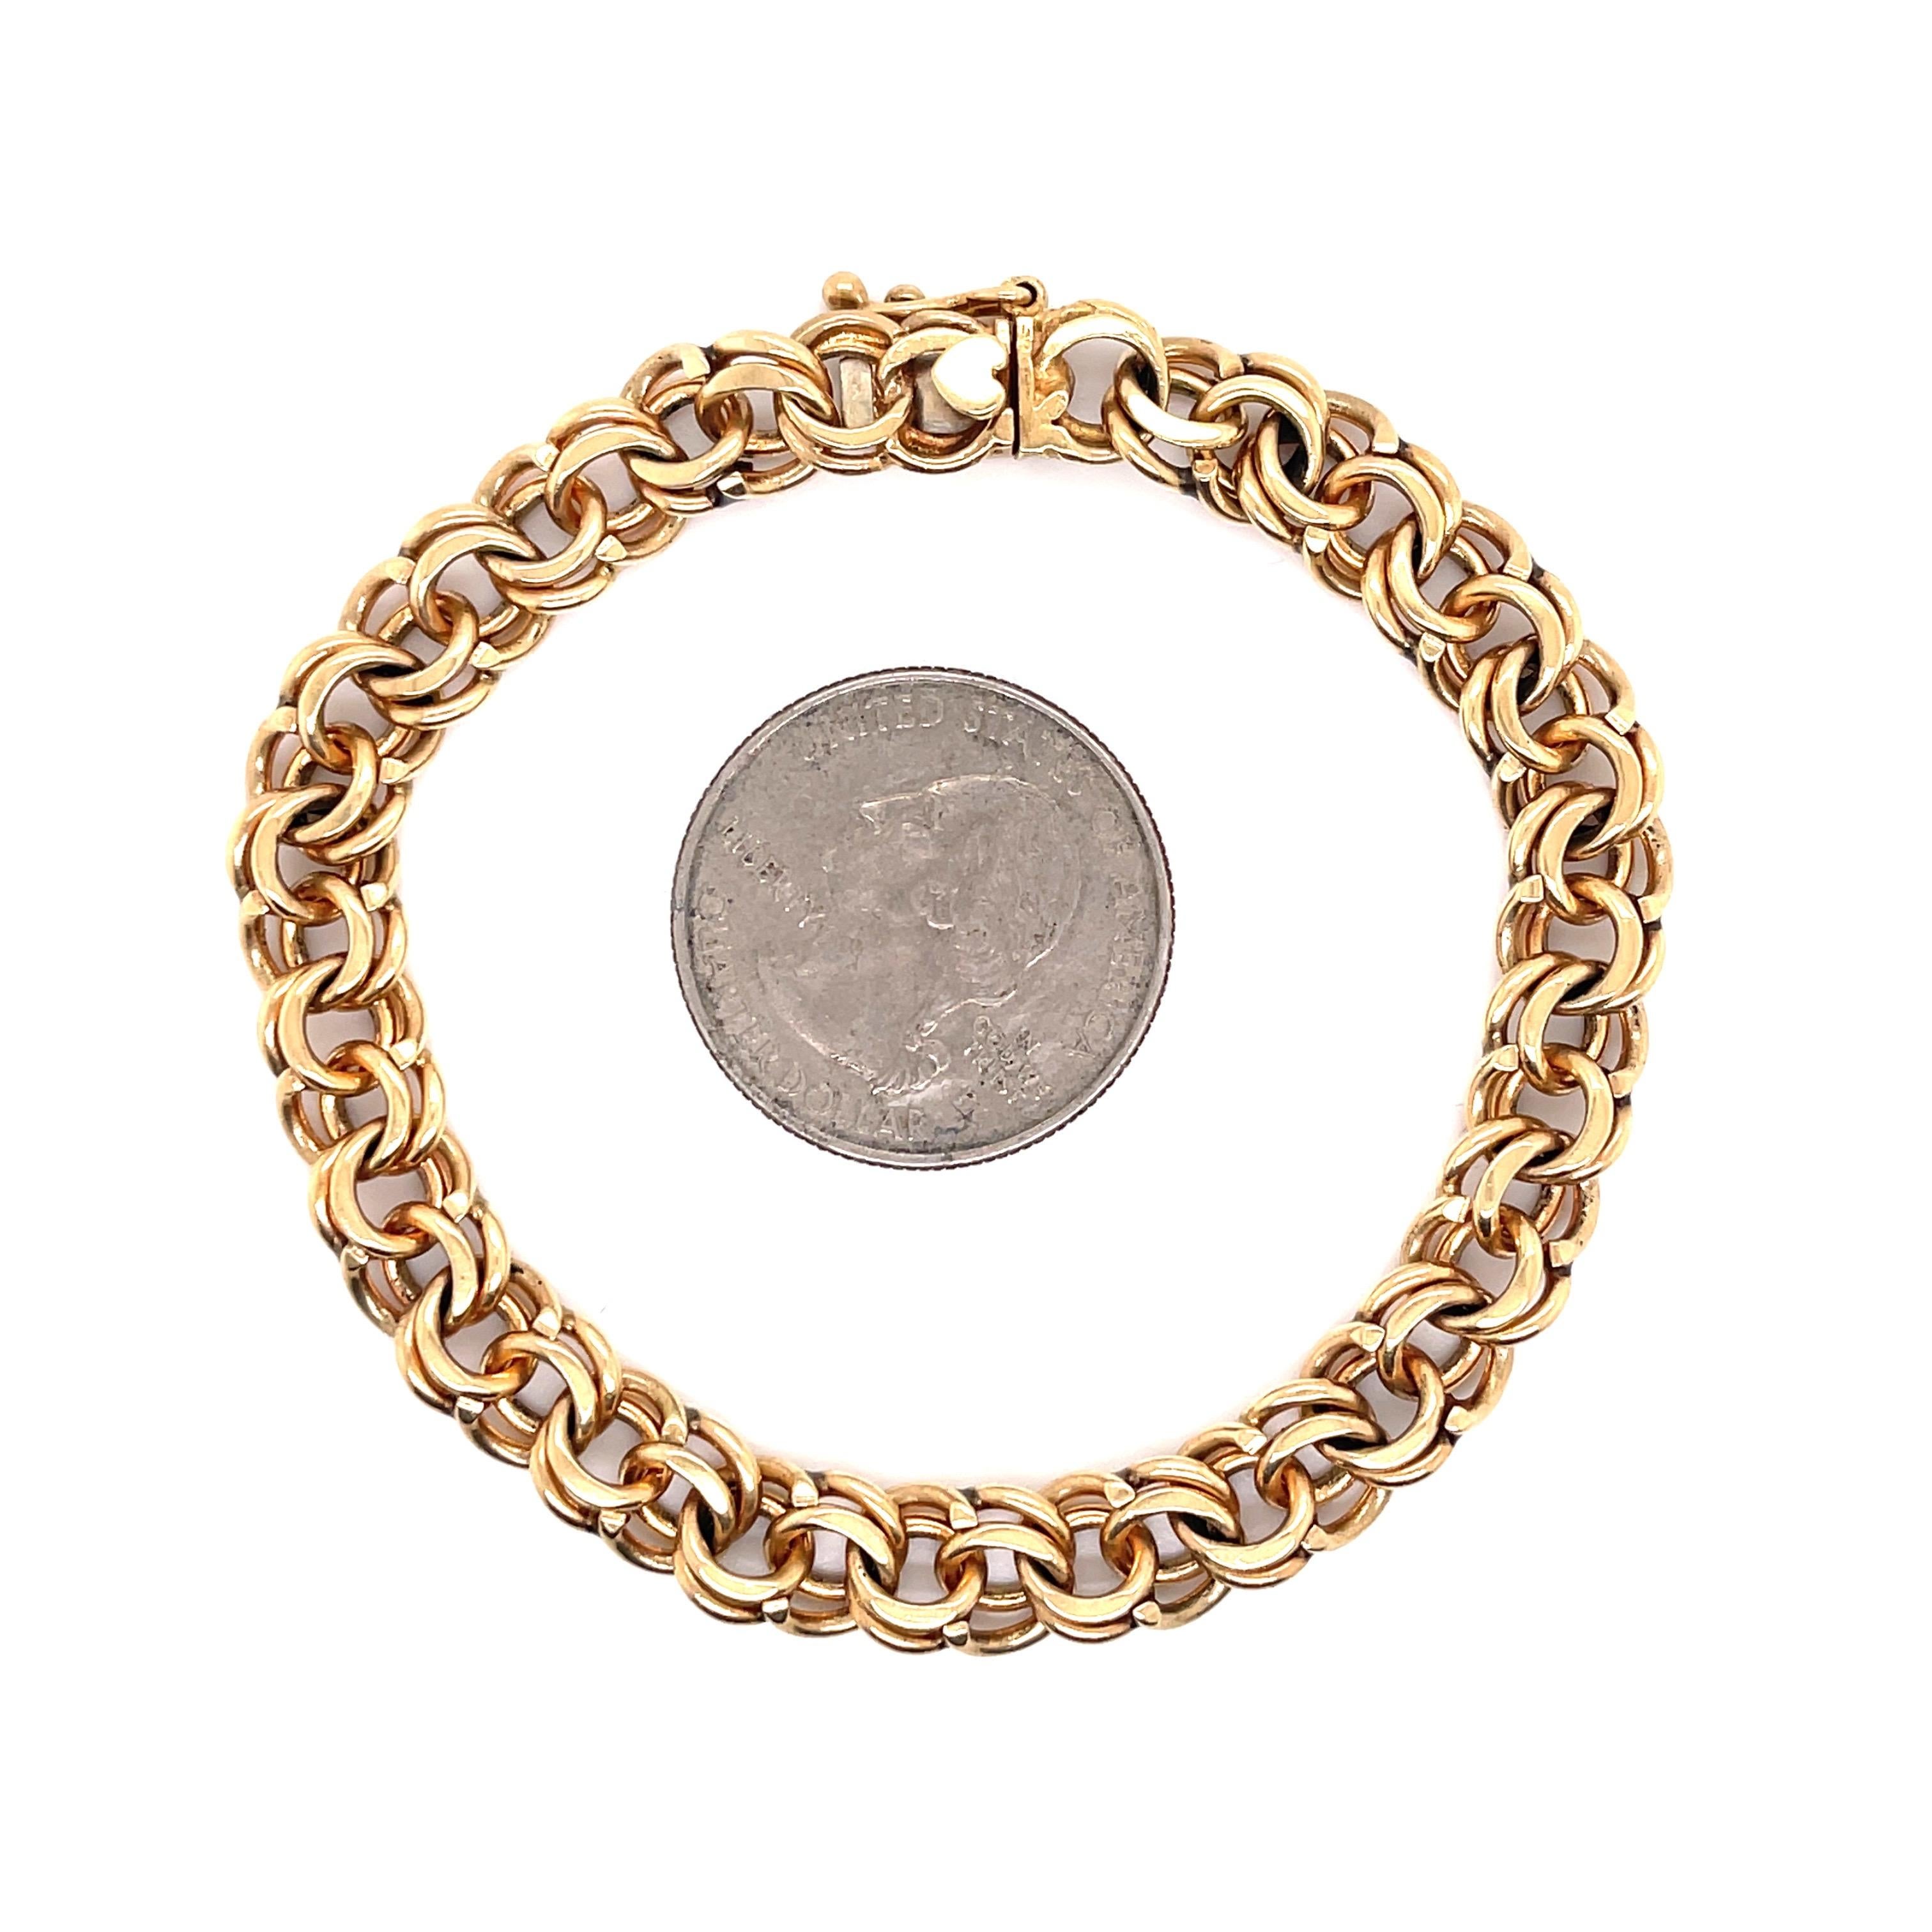 14 Karat yellow gold bracelet featuring 45 double links weighing 23.4 grams with a heart detail clasp. 
7.5